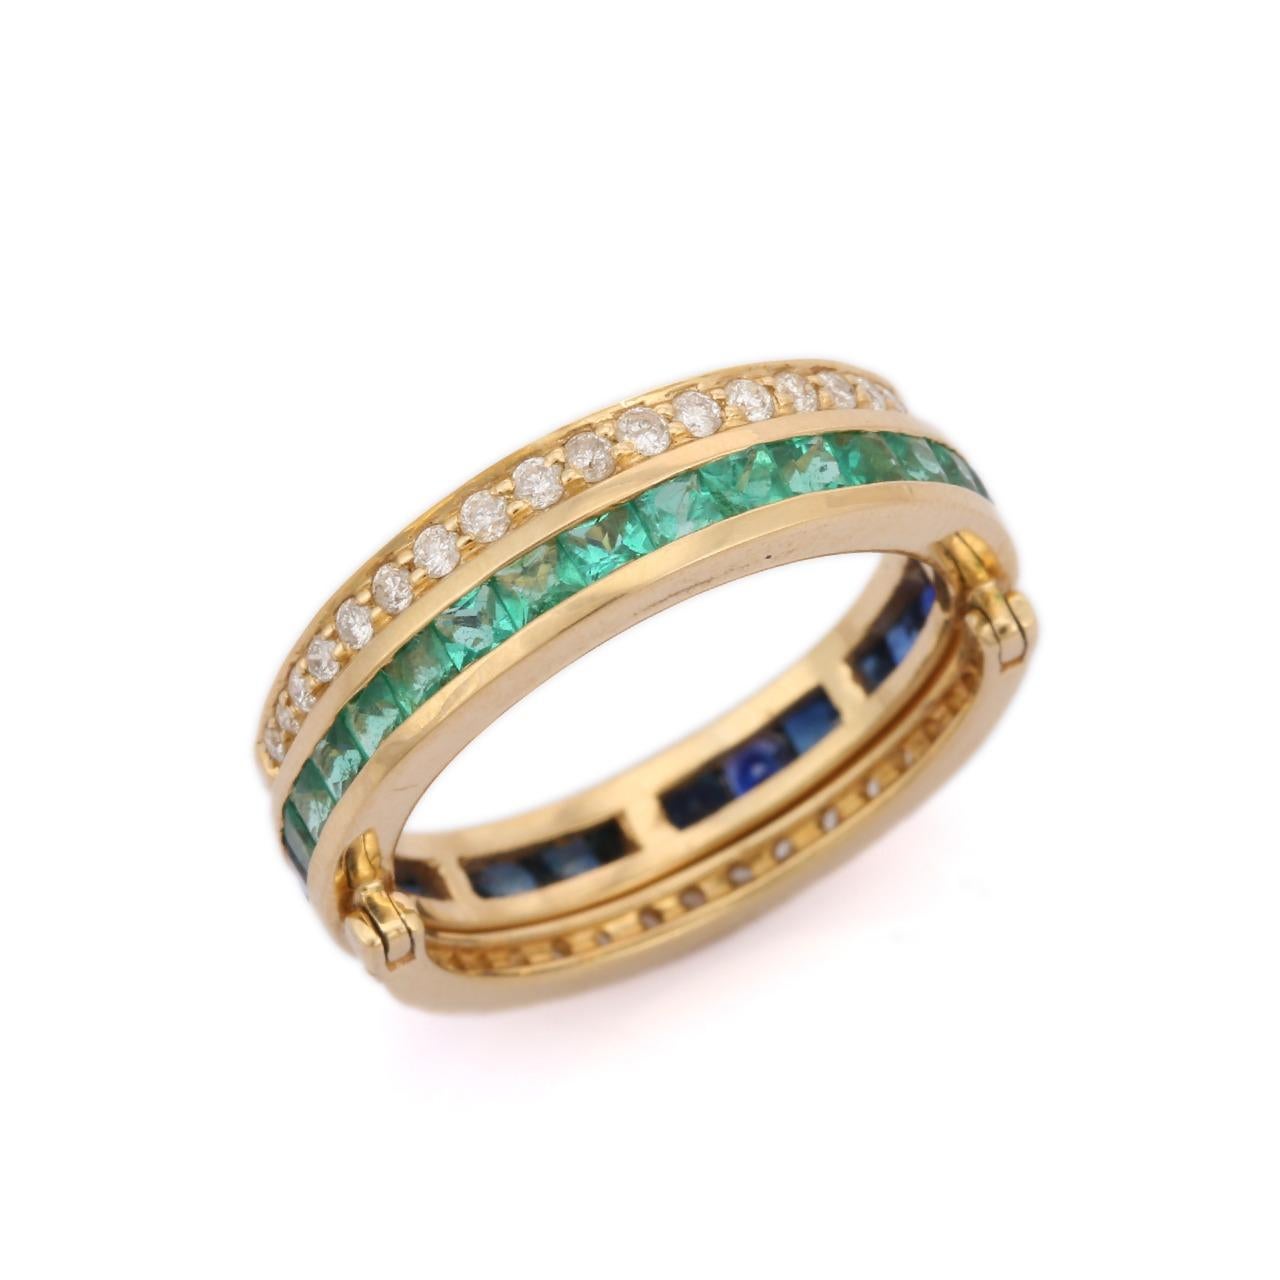 Women's or Men's 14K Yellow Gold Spinner Ring in Sapphire, Emerald and Diamond.